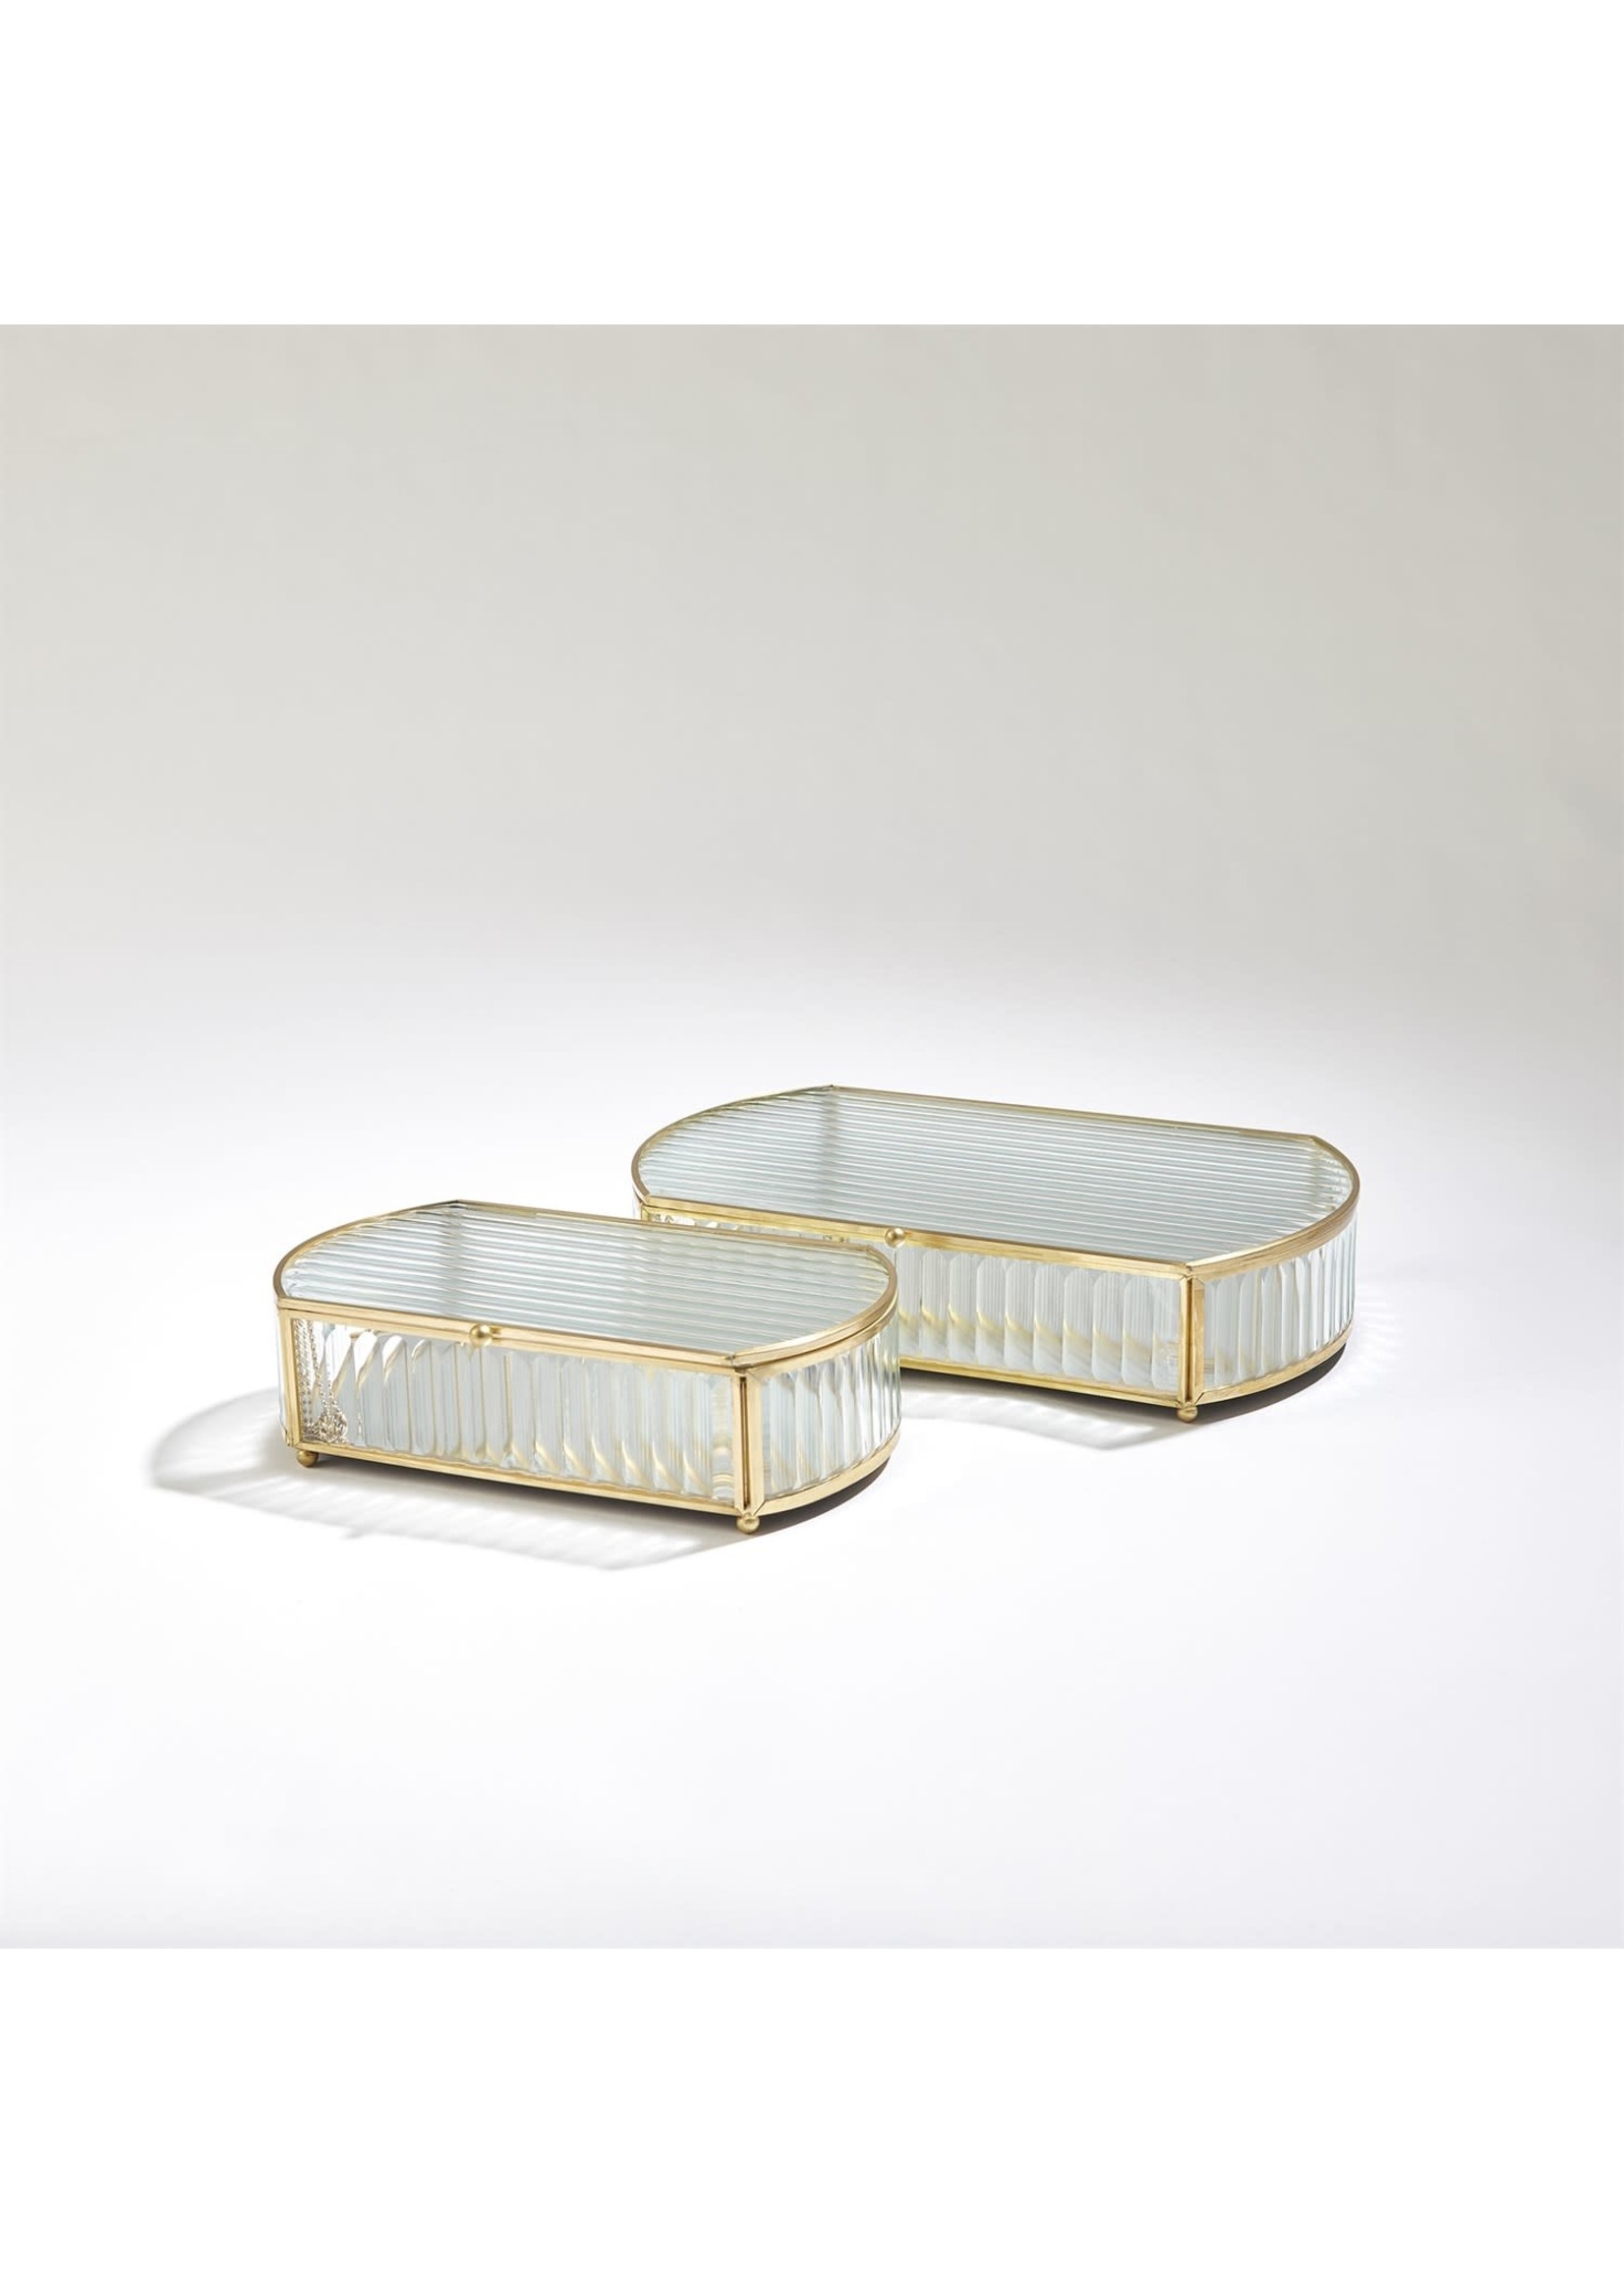 Global Views Global Views Reeded Glass Oval Box large